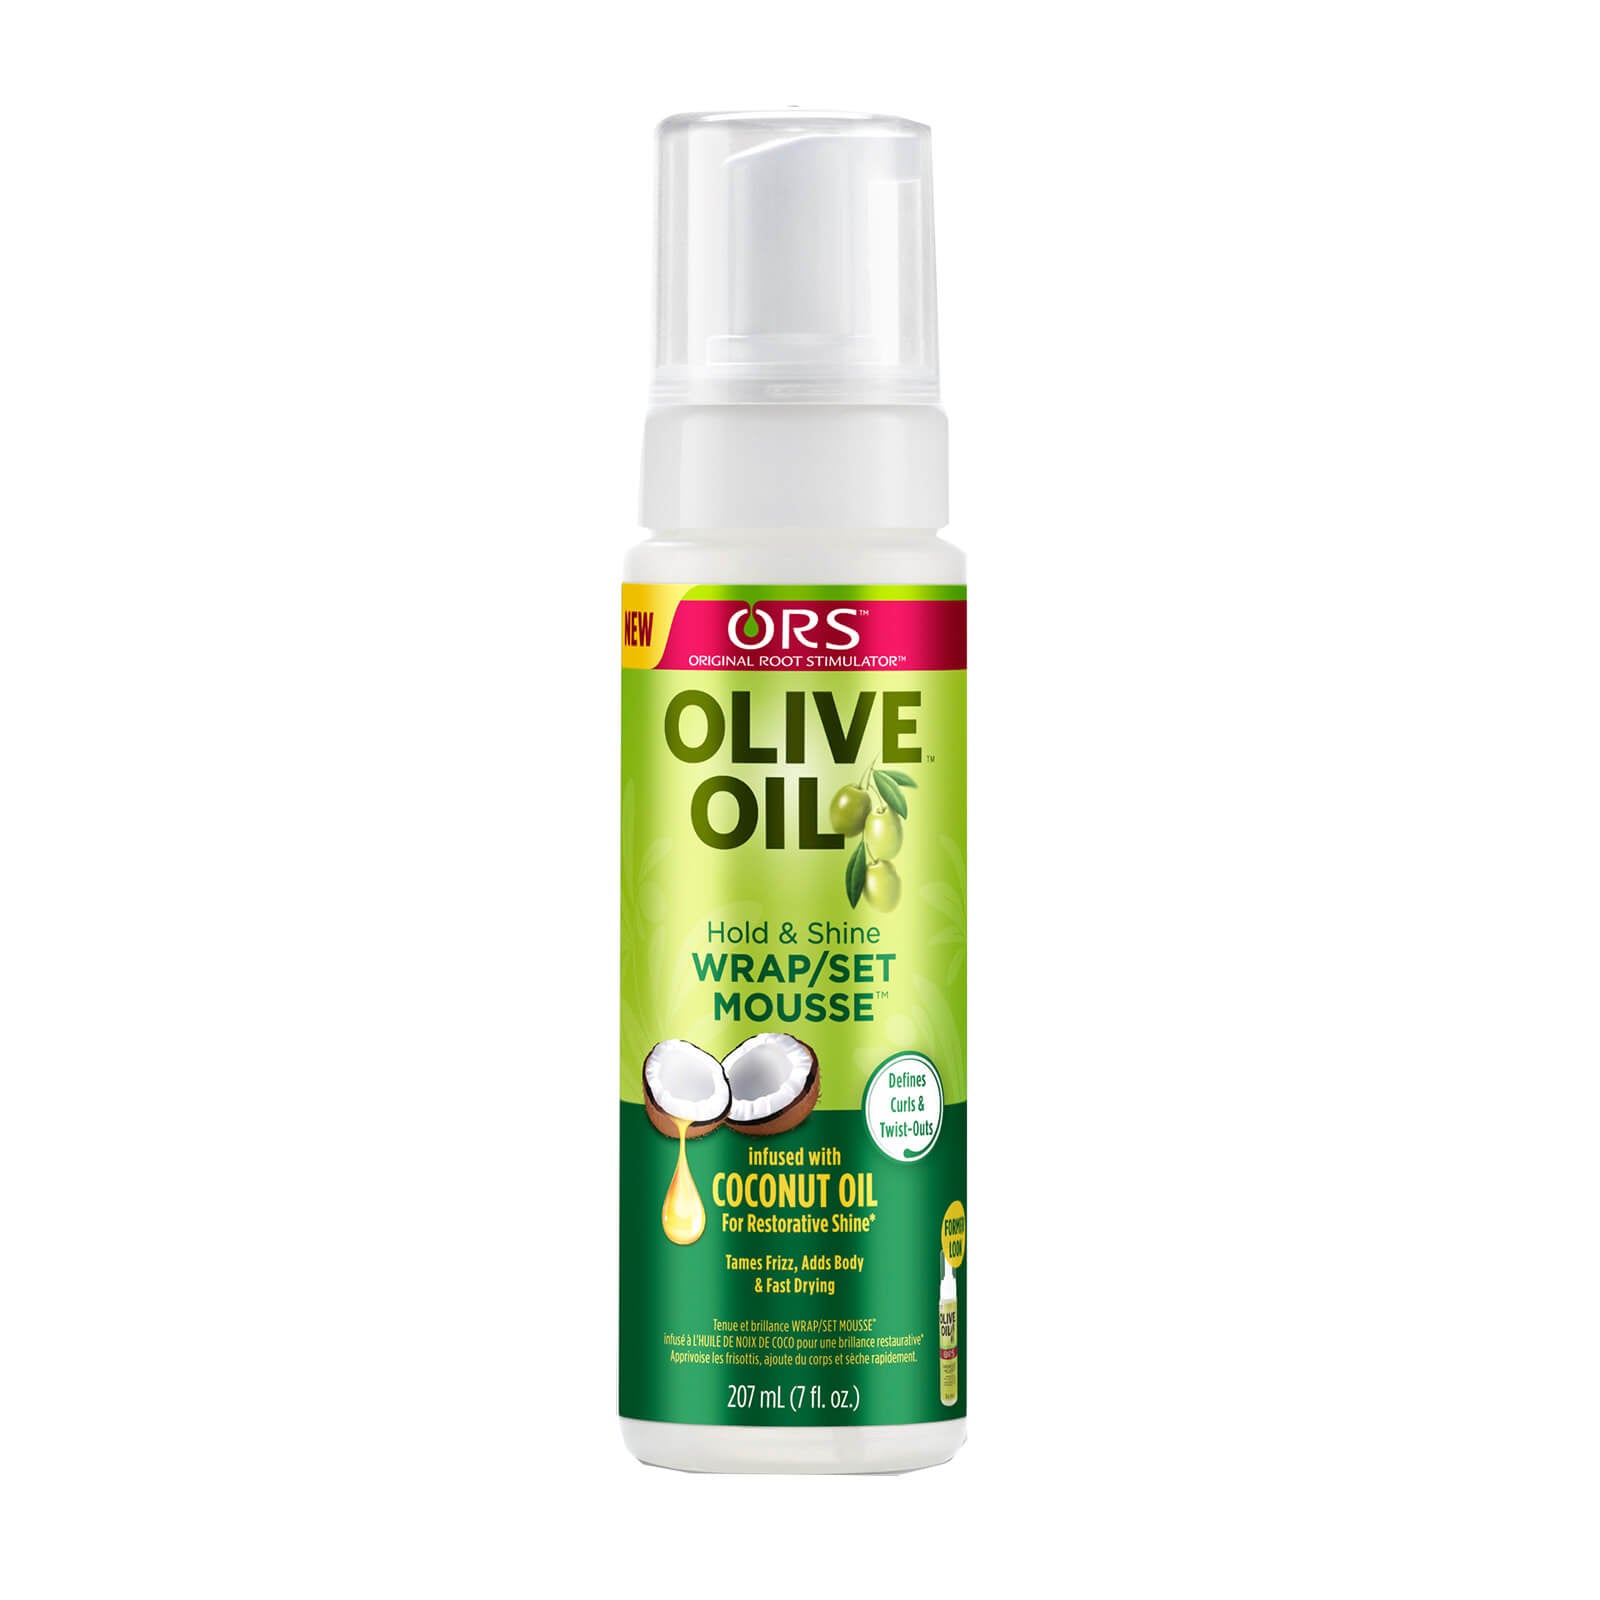 ORS Olive Oil Hold & Shine Wrap/Set Mousse, 207ml